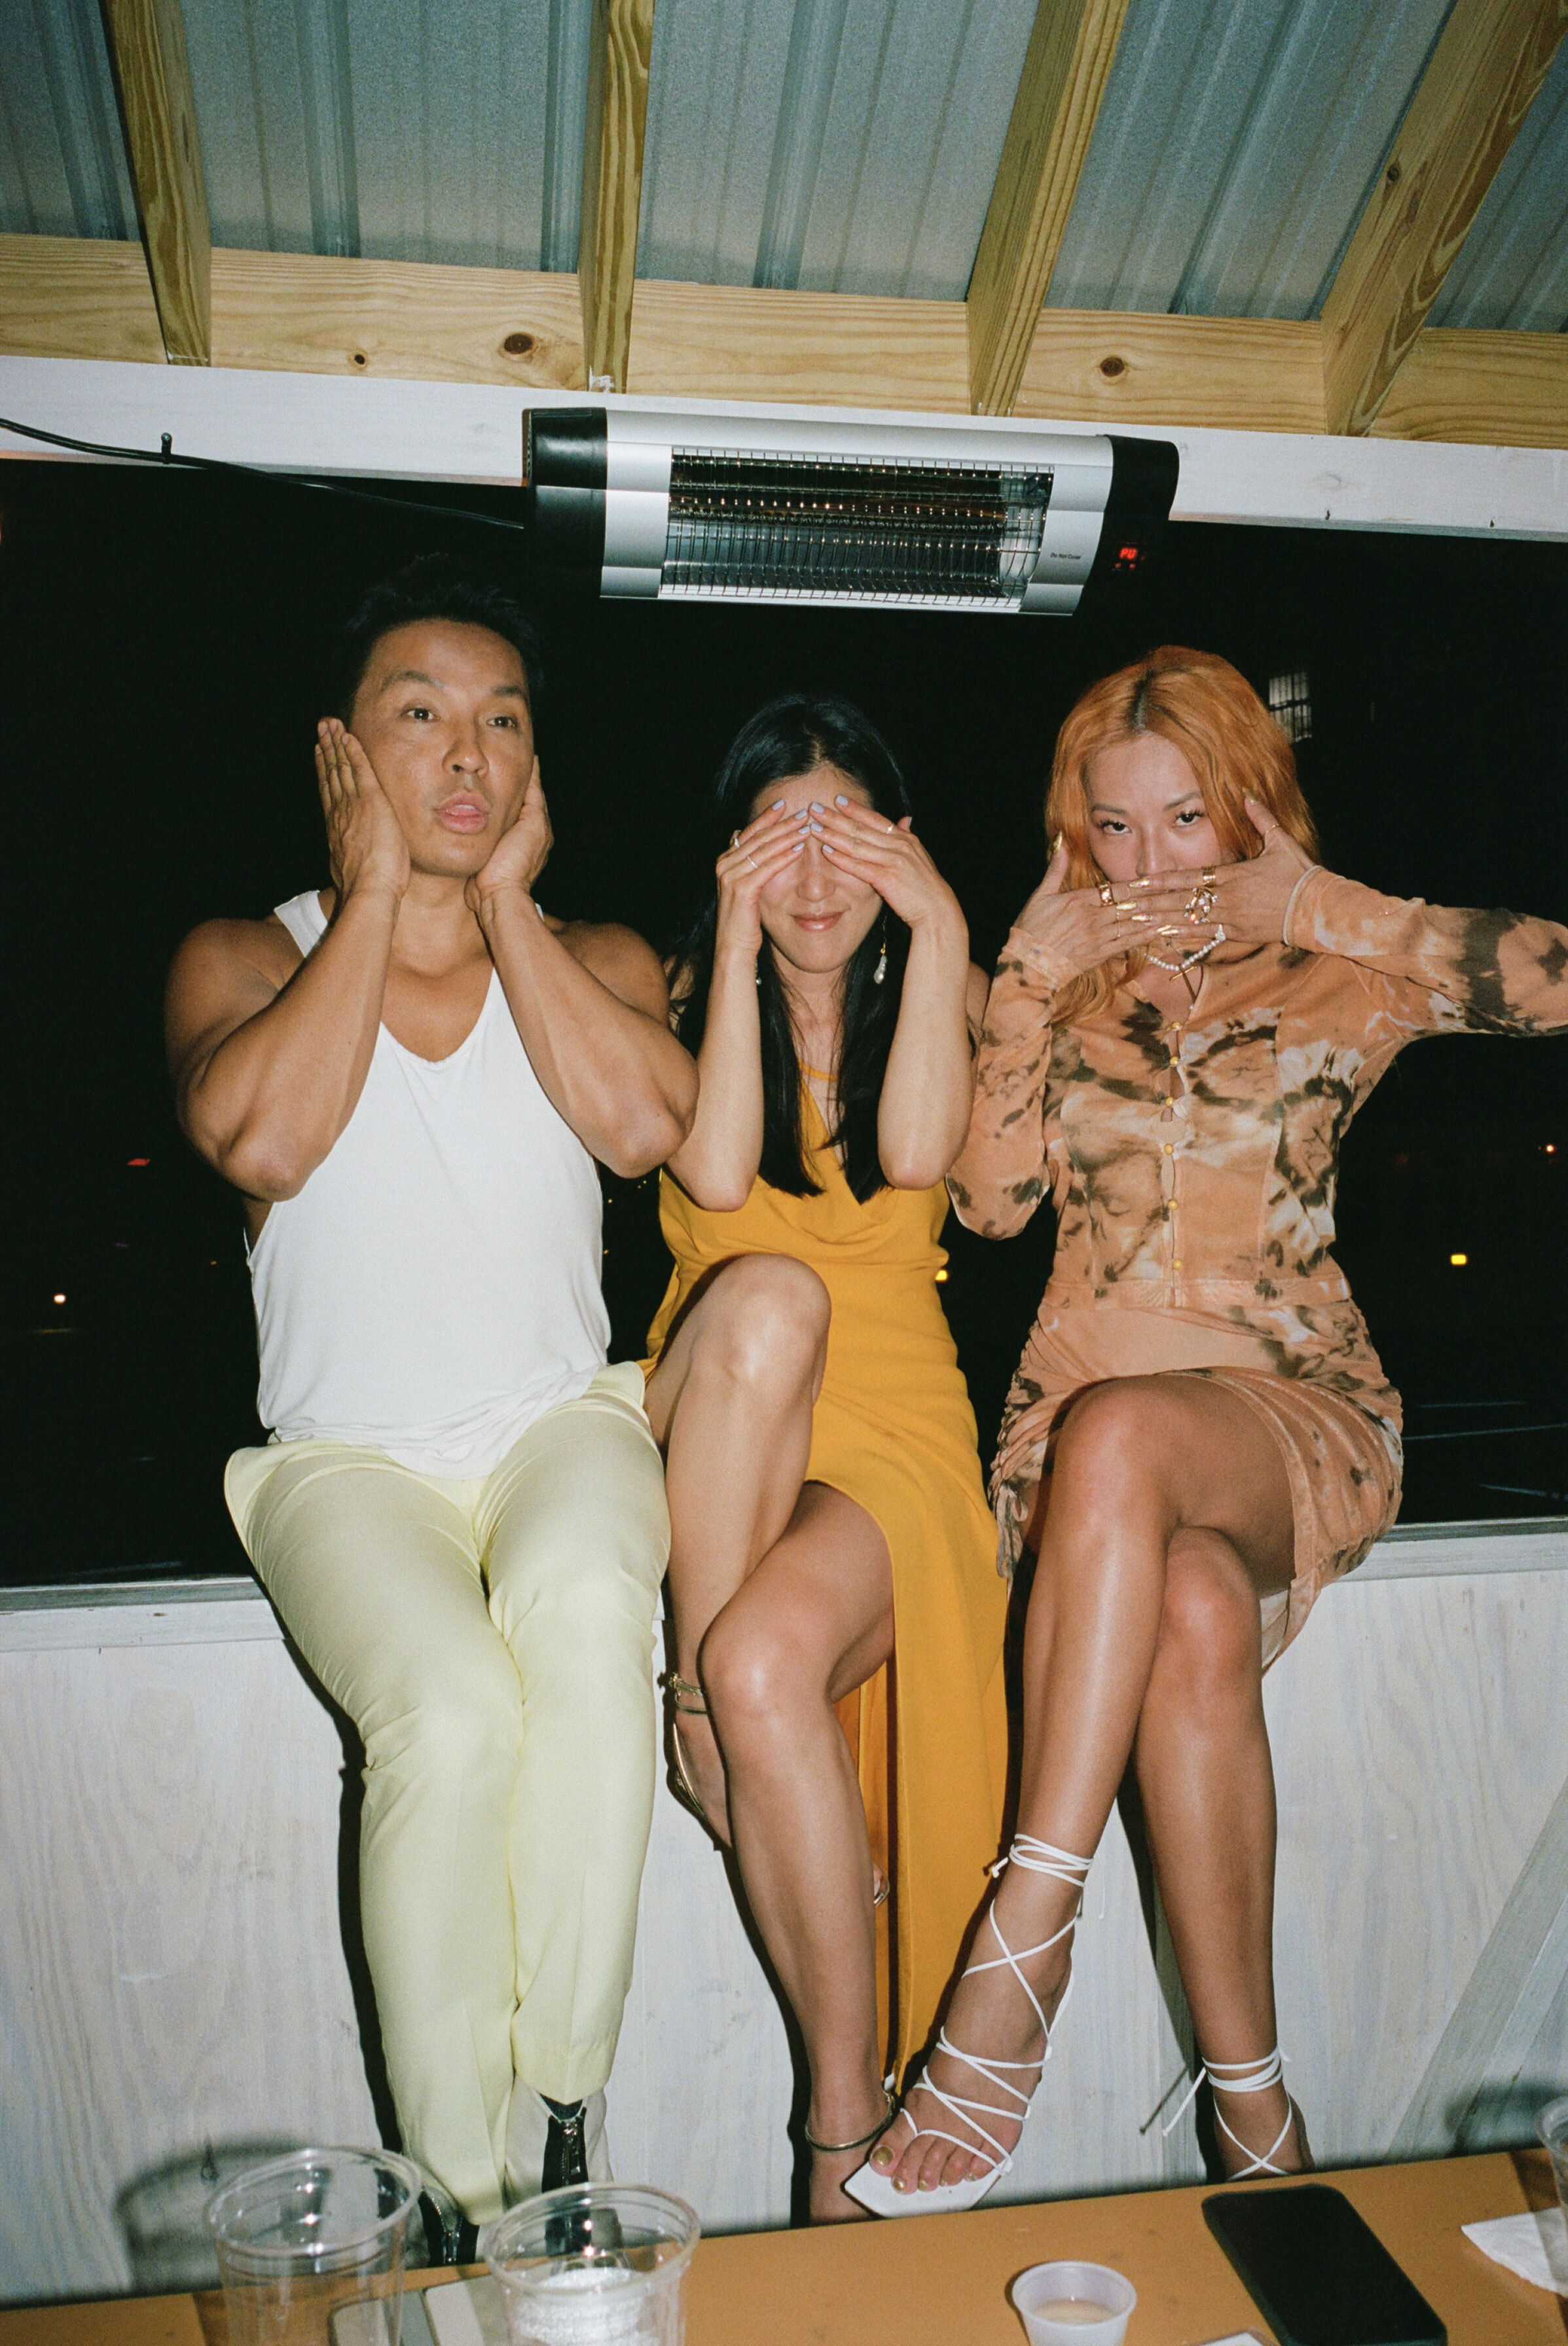 The Queer Dance Party That Became a Slaysian Celebration